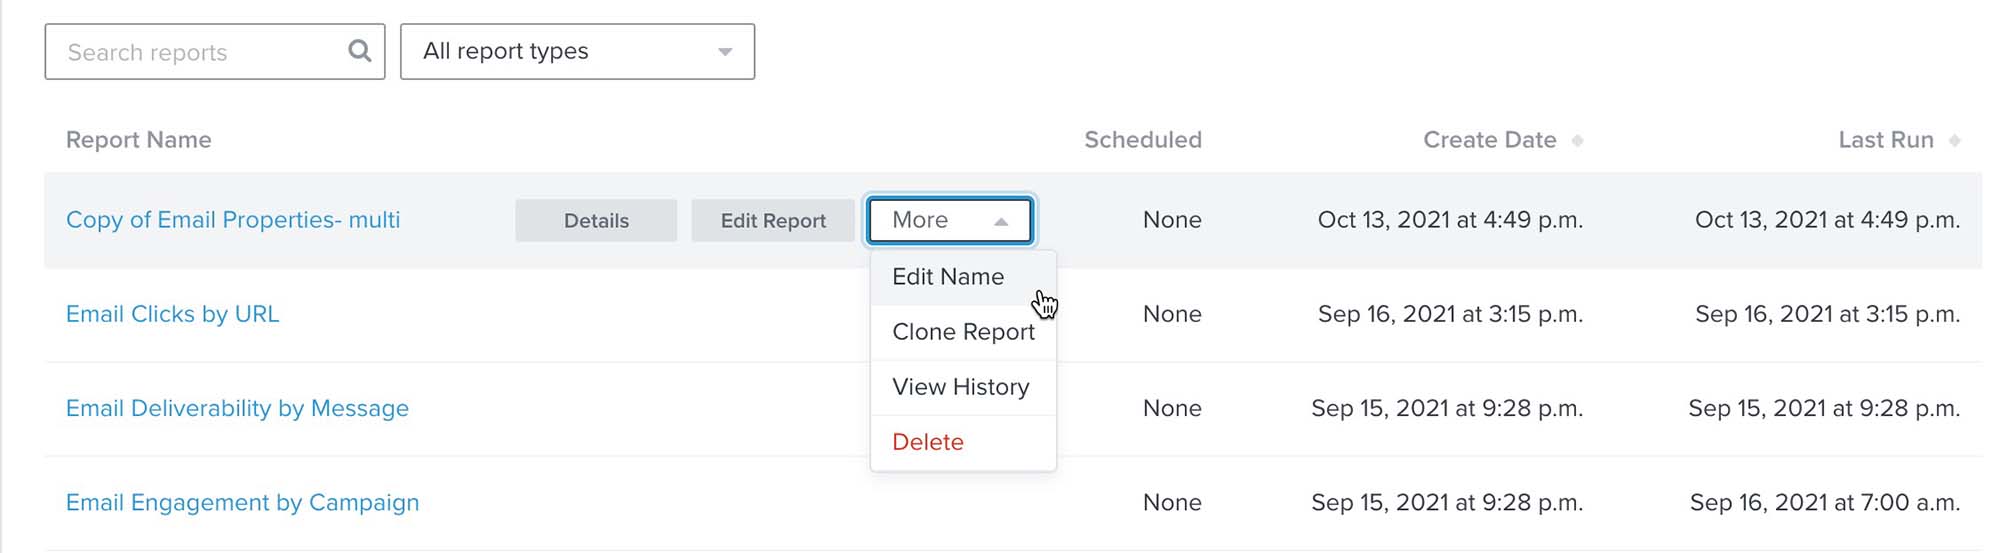 Copy report inside custom reports list, with More dropdown open and Edit Name chosen